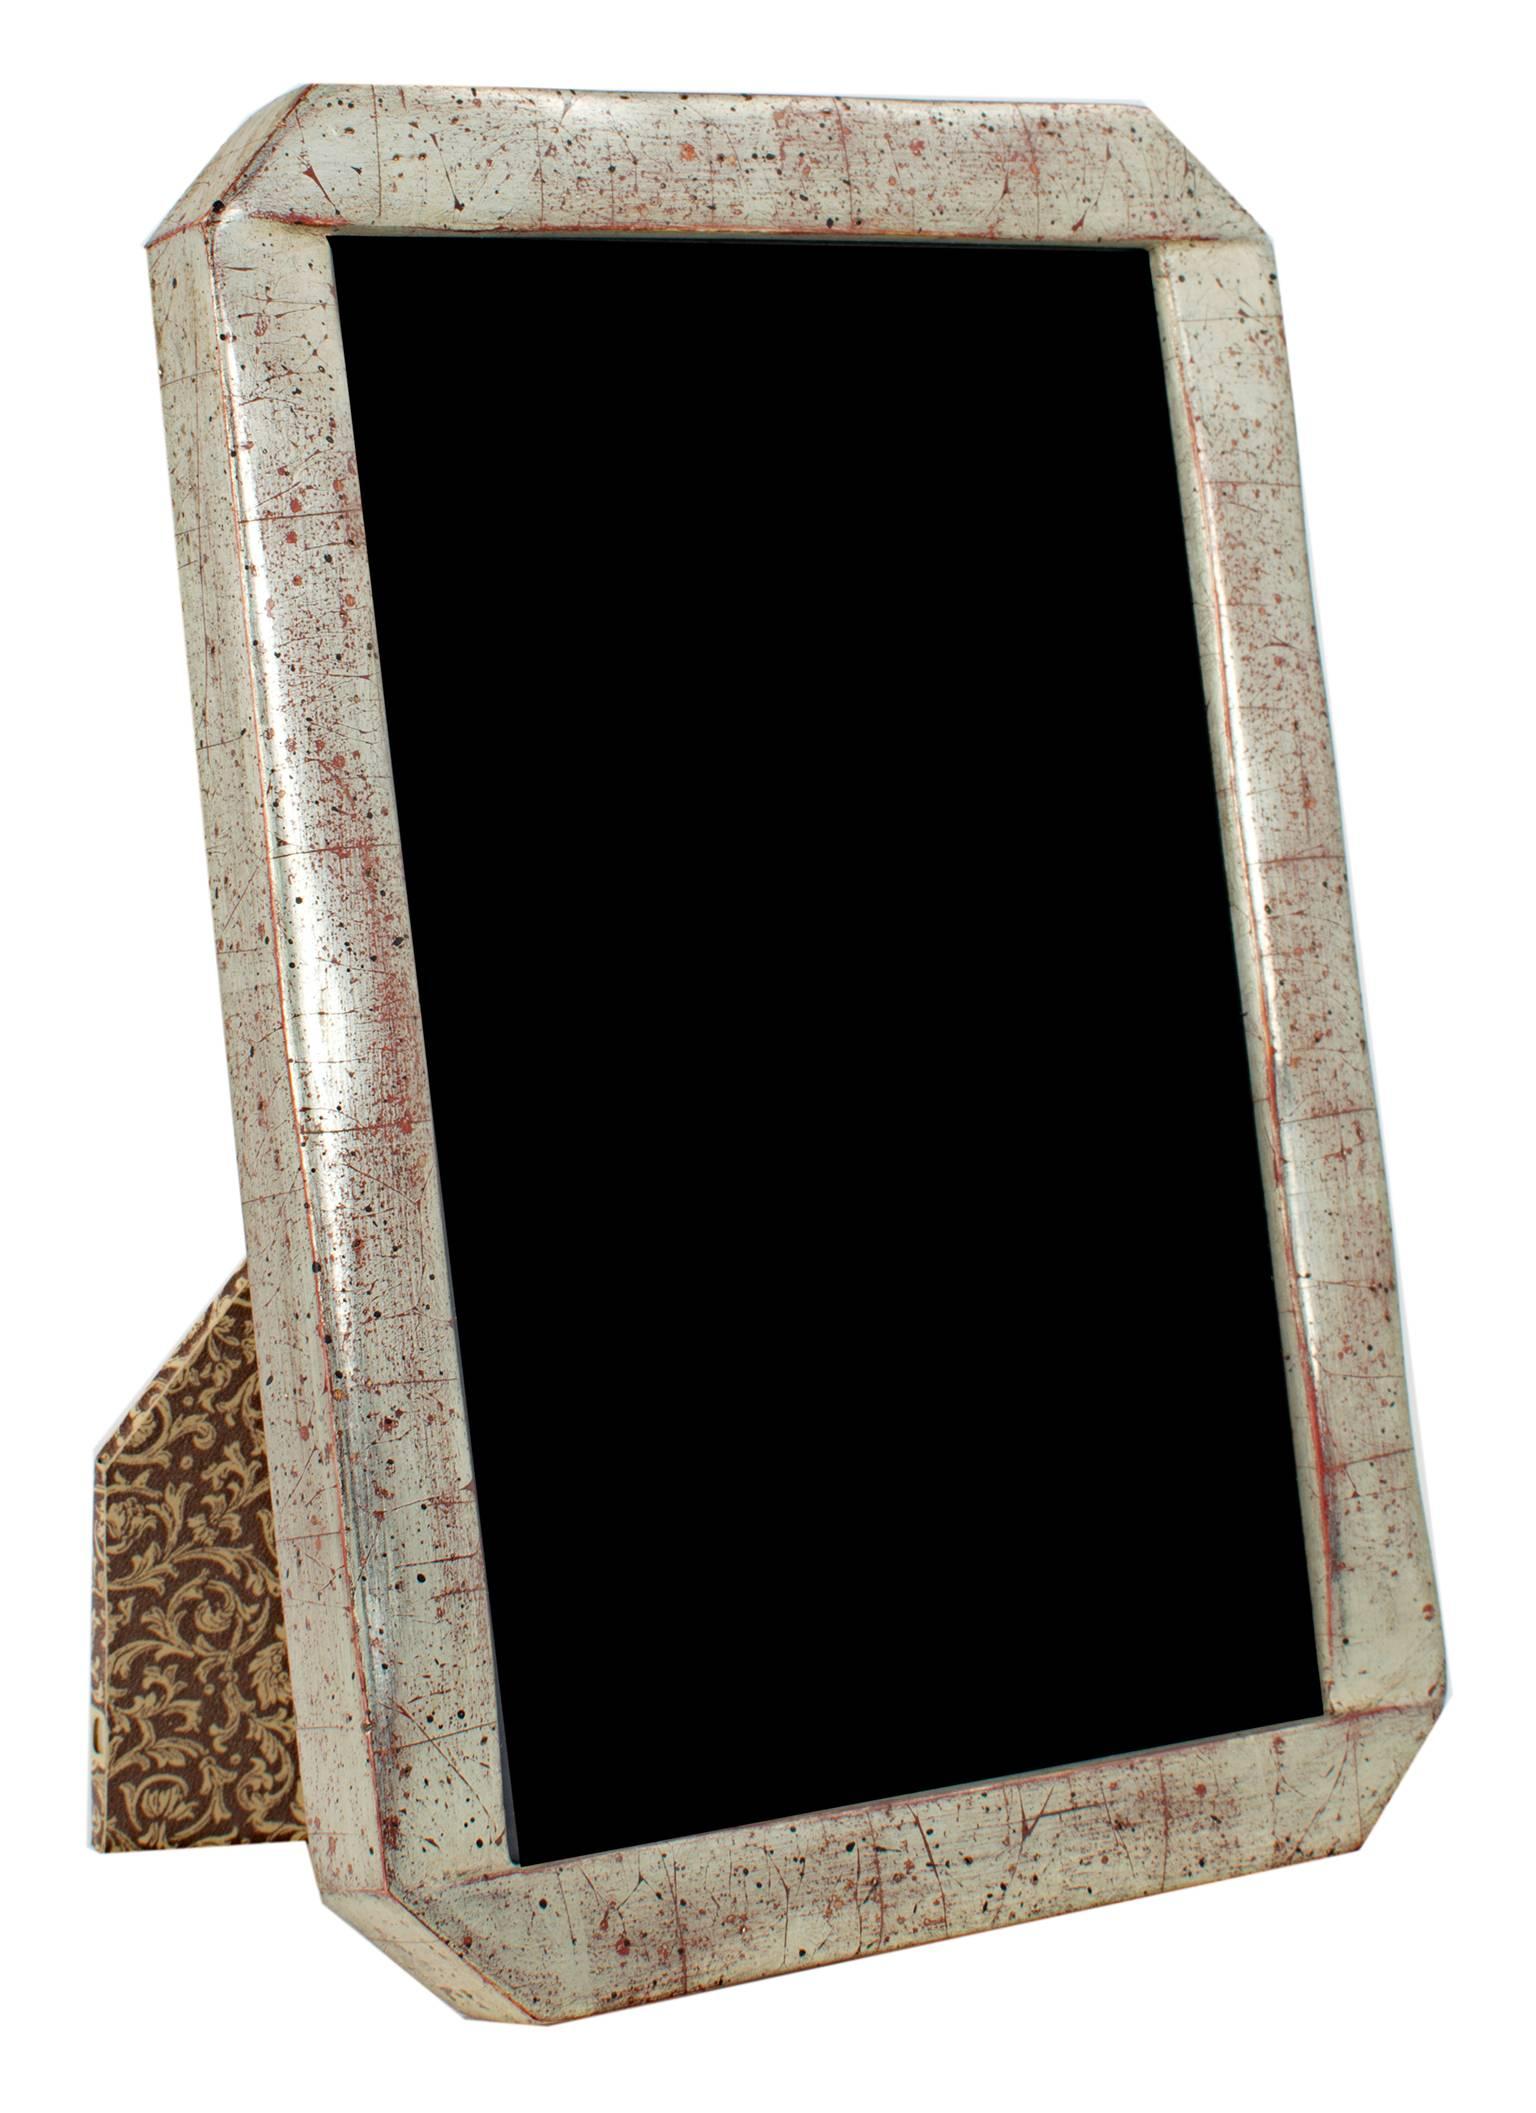 "Handmade 12K White Gold Leaf Photo Frame, " Wood 4x6 in frame created in Romania - Art by Unknown